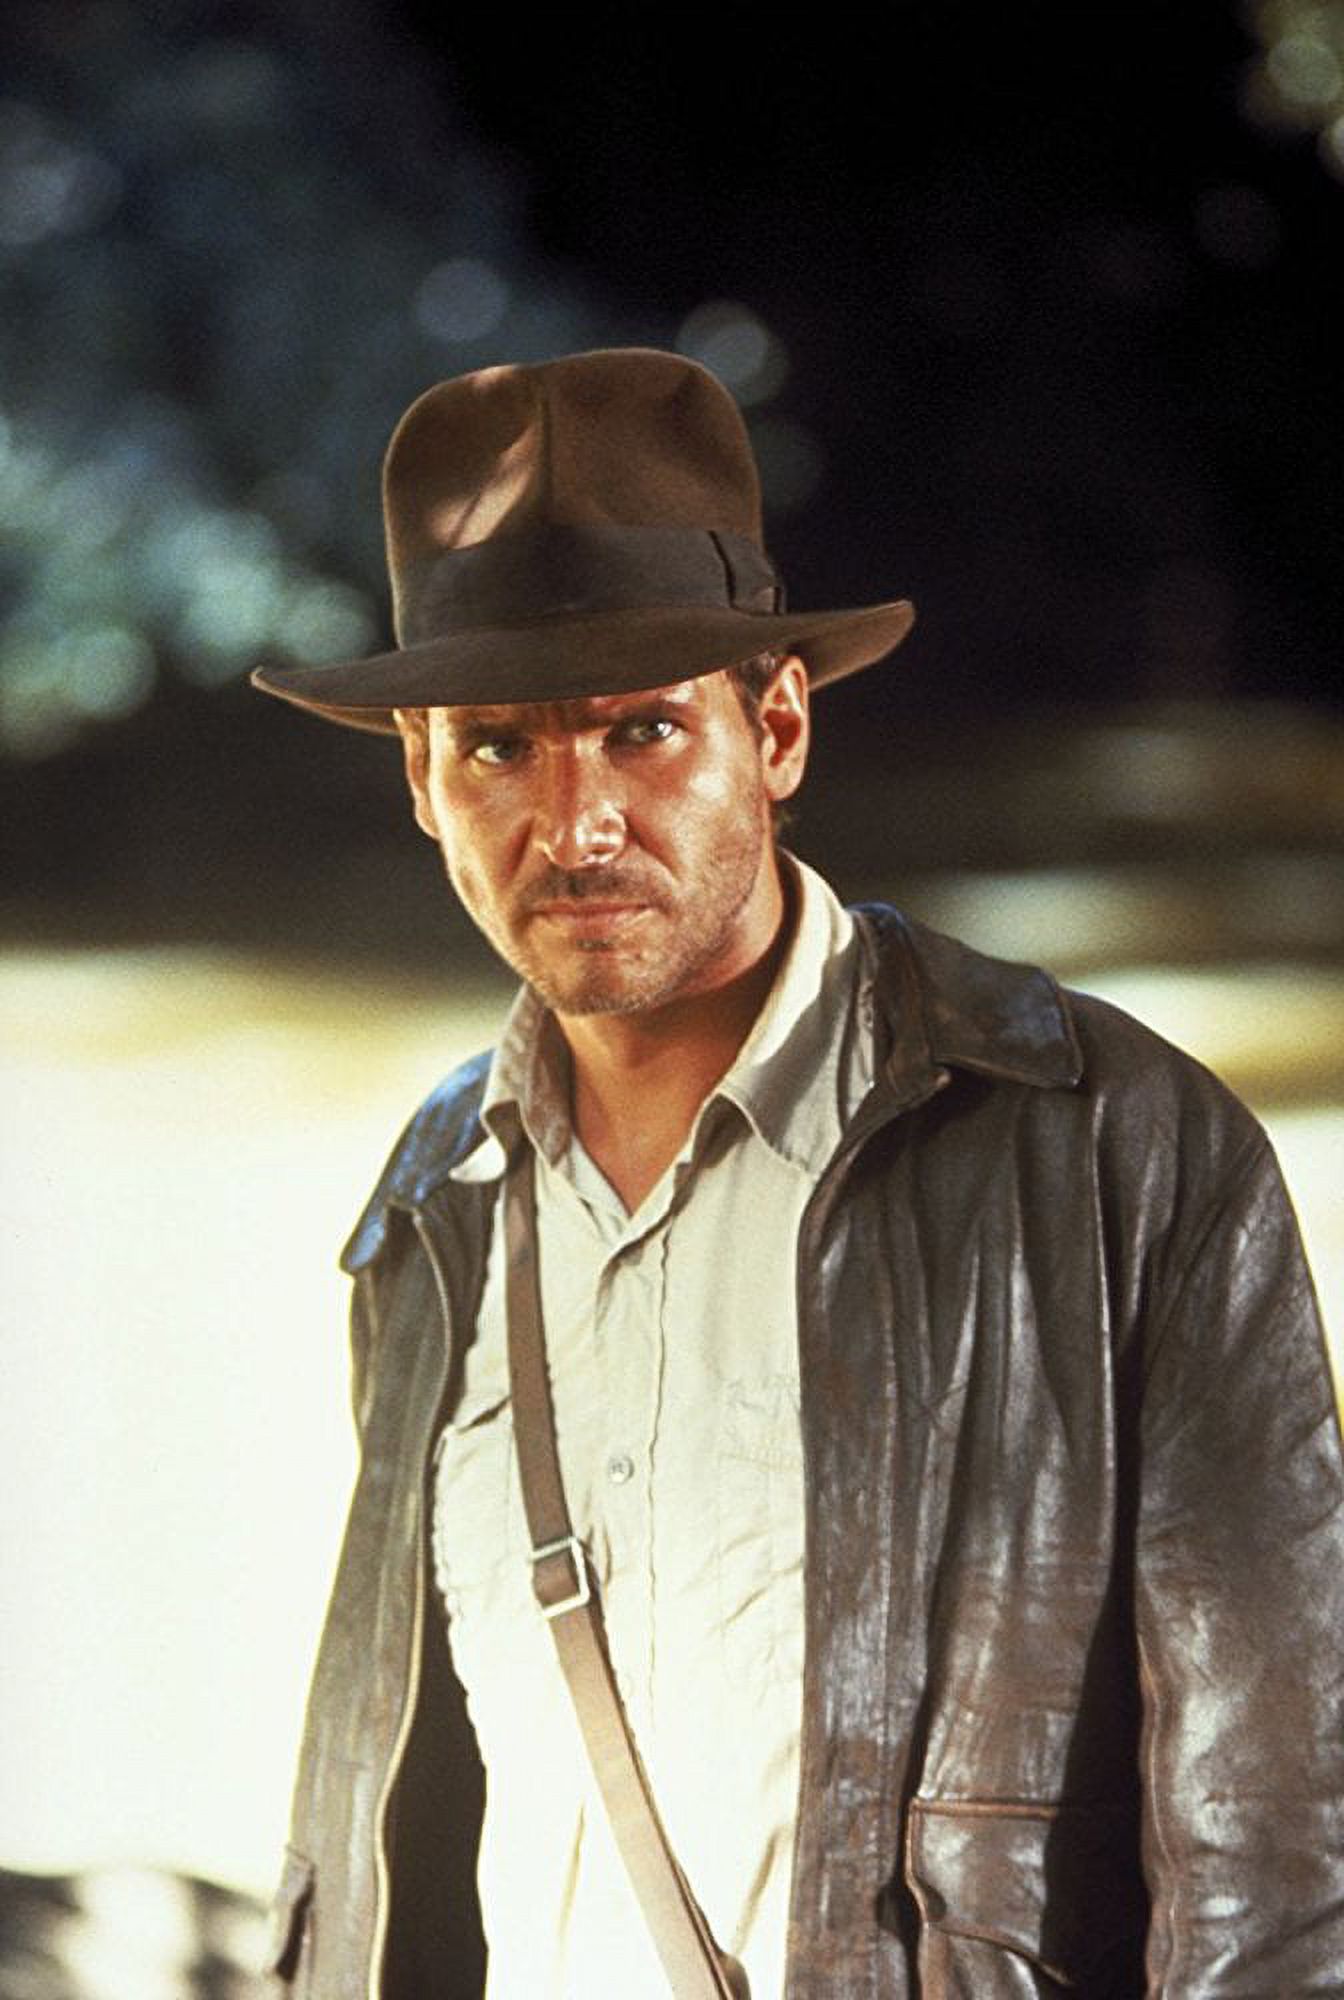 Indiana Jones and the Raiders of the Lost Ark (Blu-ray) - image 2 of 5